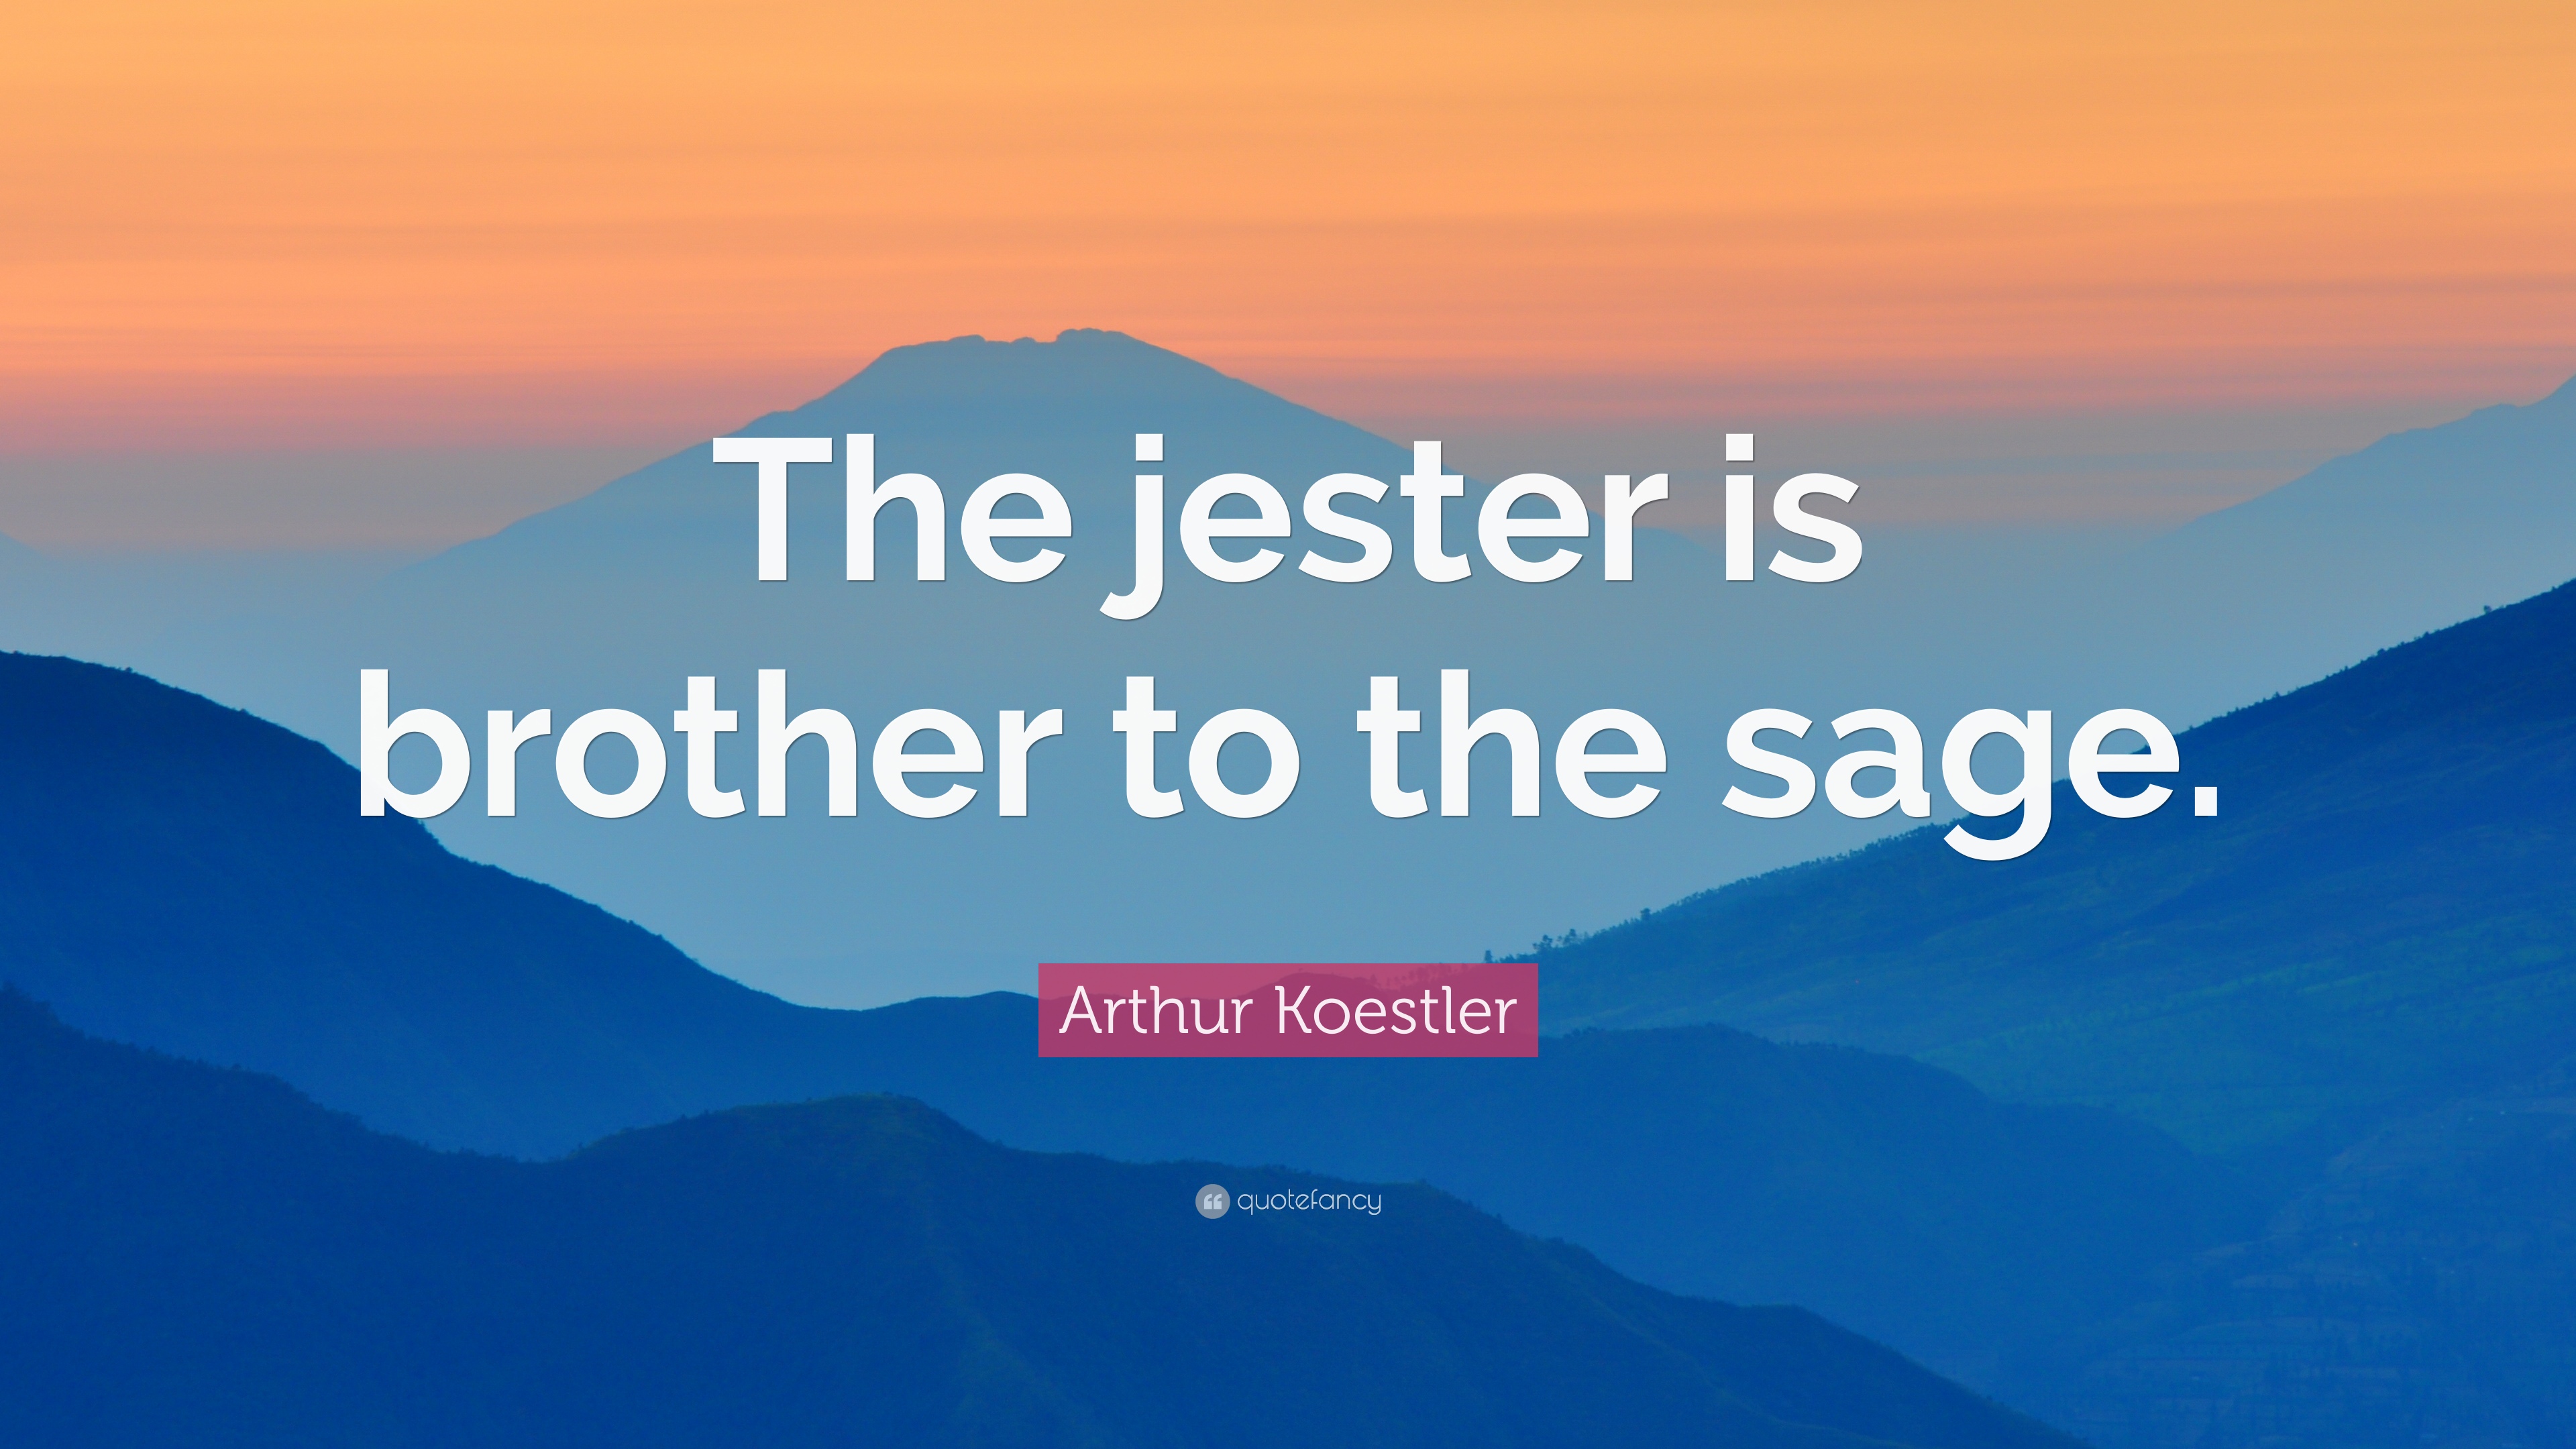 Arthur Koestler Quote: “The jester is brother to the sage.” 7